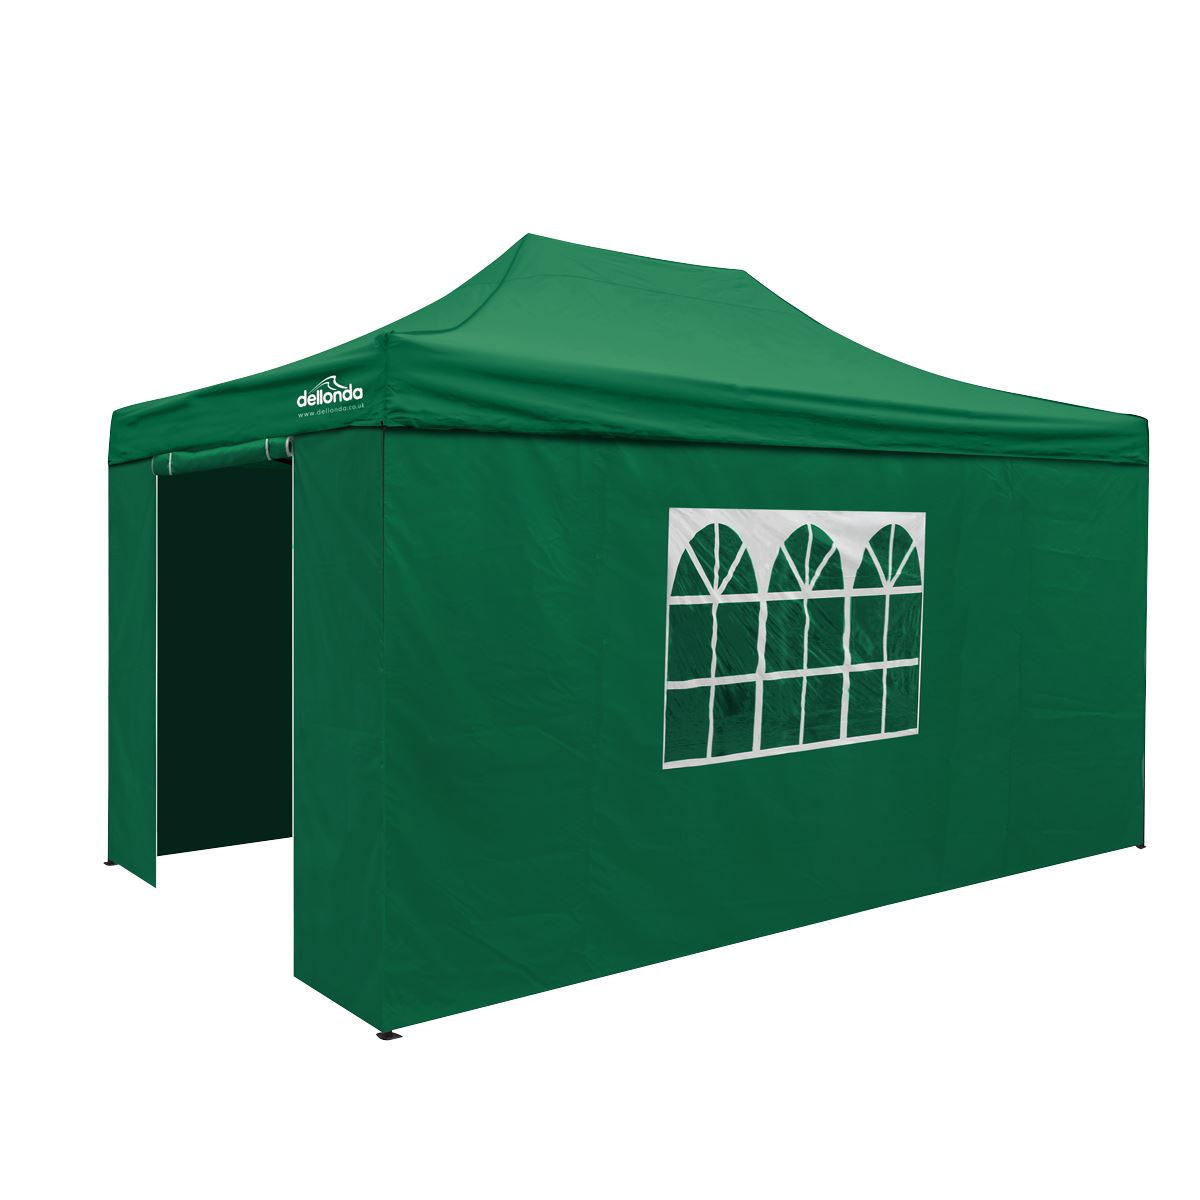 Dellonda Premium 3x4.5m Pop-Up Gazebo & Side Walls, PVC Coated, Water Resistant Fabric with Carry Bag, Rope, Stakes & Weight Bags - Green